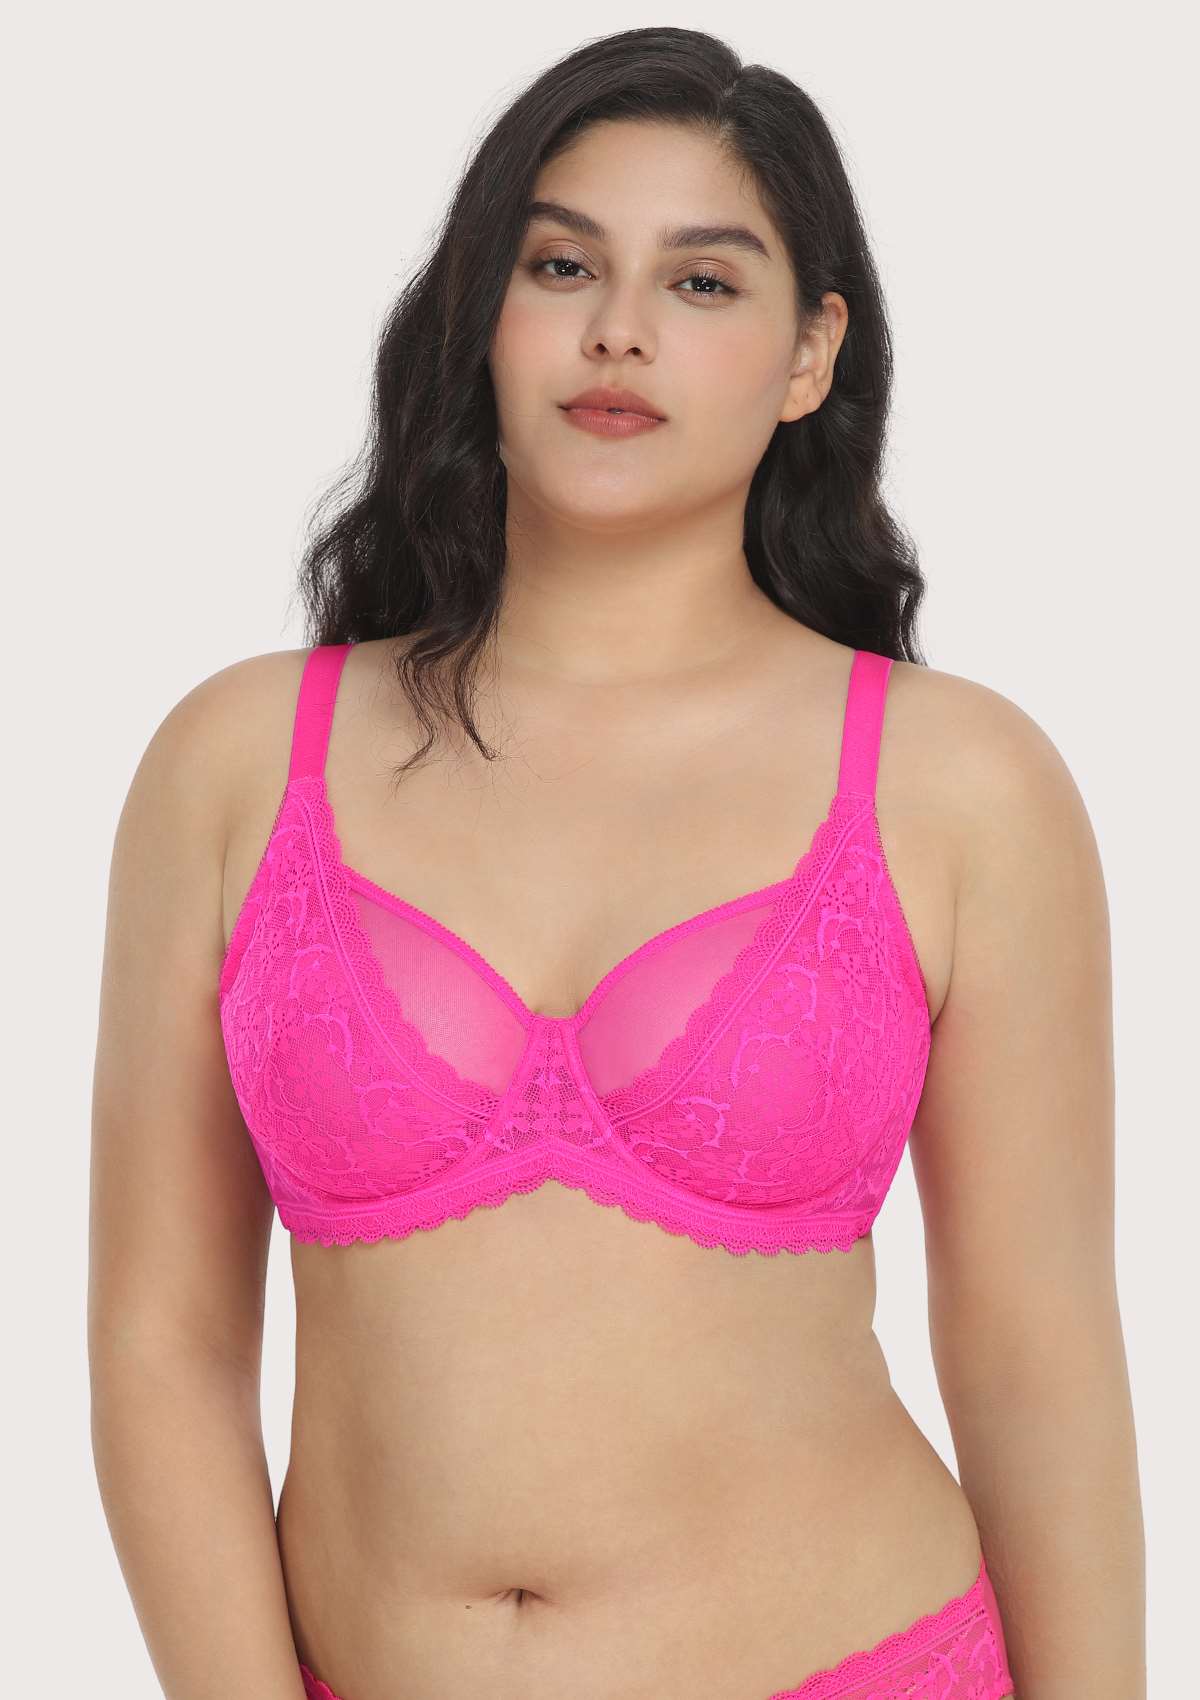 HSIA Anemone Lace Unlined Bra: Supportive, Lightweight Bra - Champagne / 34 / D